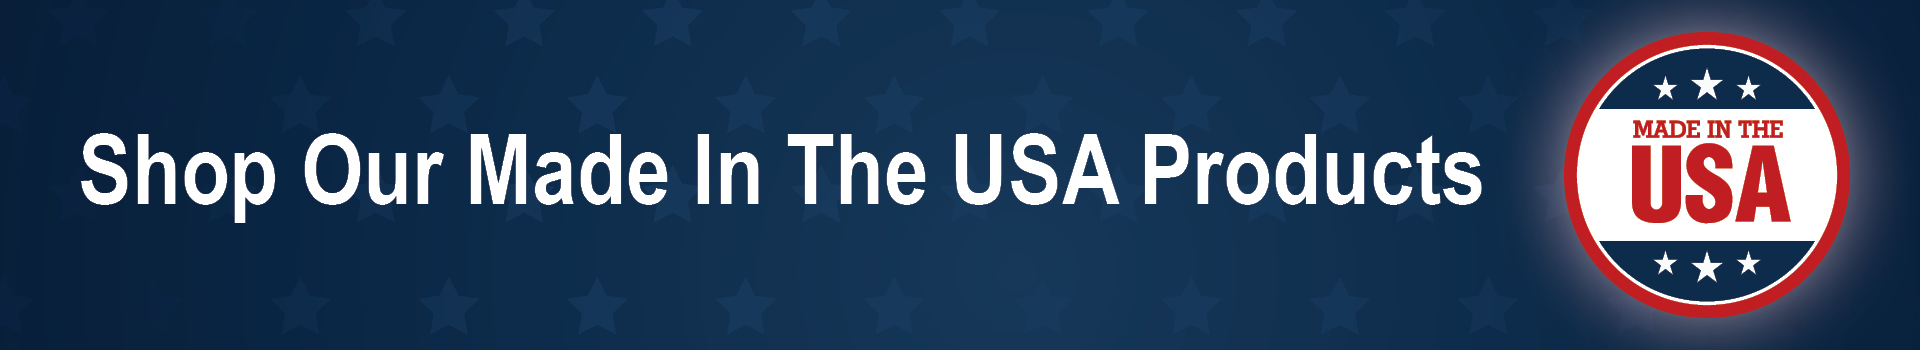 made-in-usa-banner